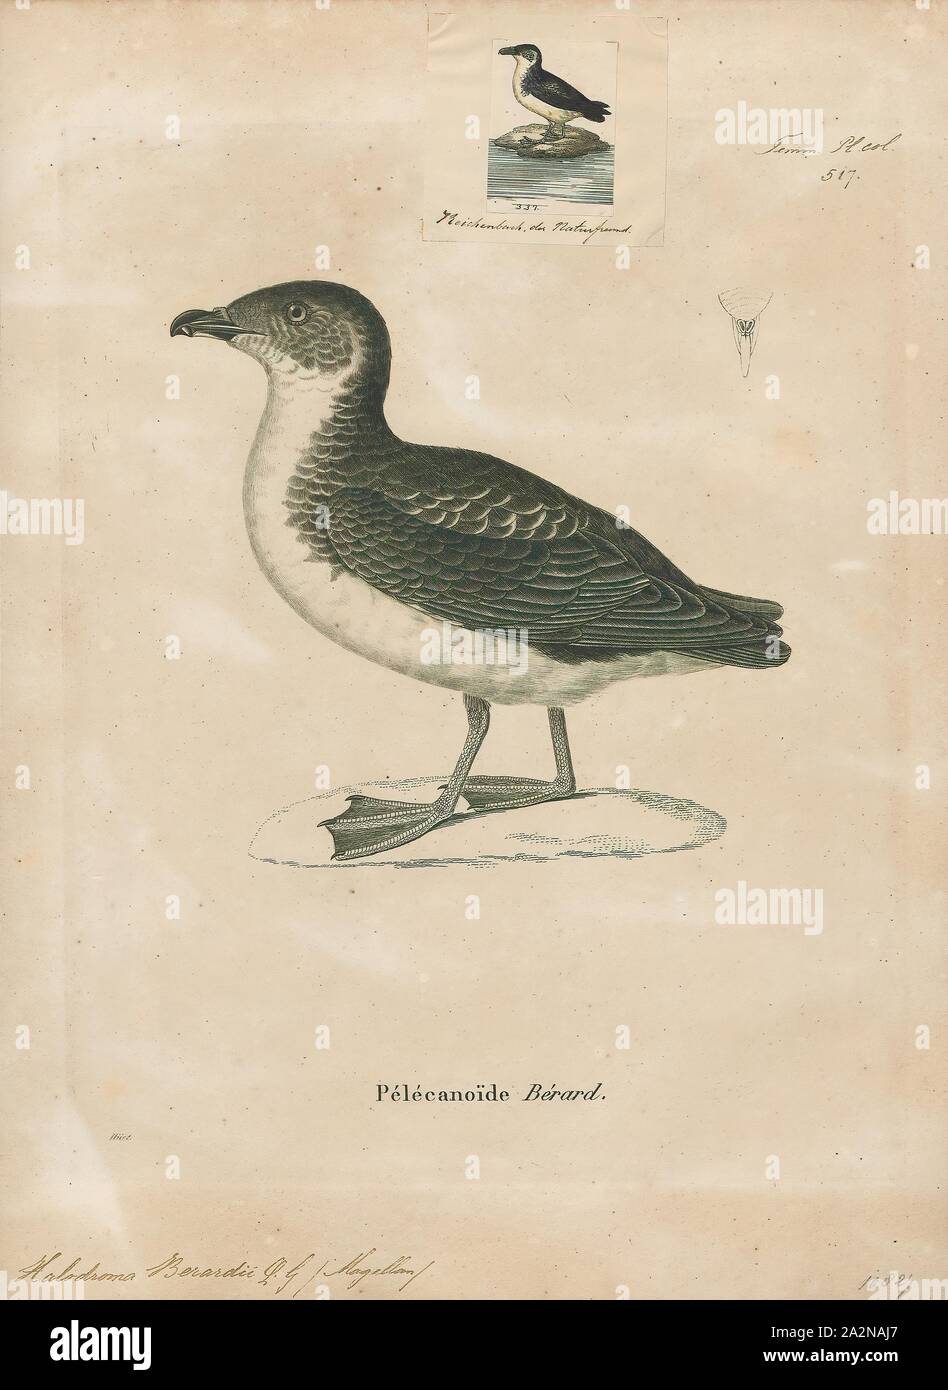 Pelecanoides berardi, Print, Diving petrel, The diving petrels are seabirds in the bird order Procellariiformes. There are five very similar species all in the family Procellariidae and genus Pelecanoides (Lacépède, 1799), distinguished only by small differences in the coloration of their plumage, habitat, and bill construction. They are only found in the Southern Hemisphere. Some authorities place the diving petrels in their own family, the Pelecanoididae.[2], 1700-1880 Stock Photo